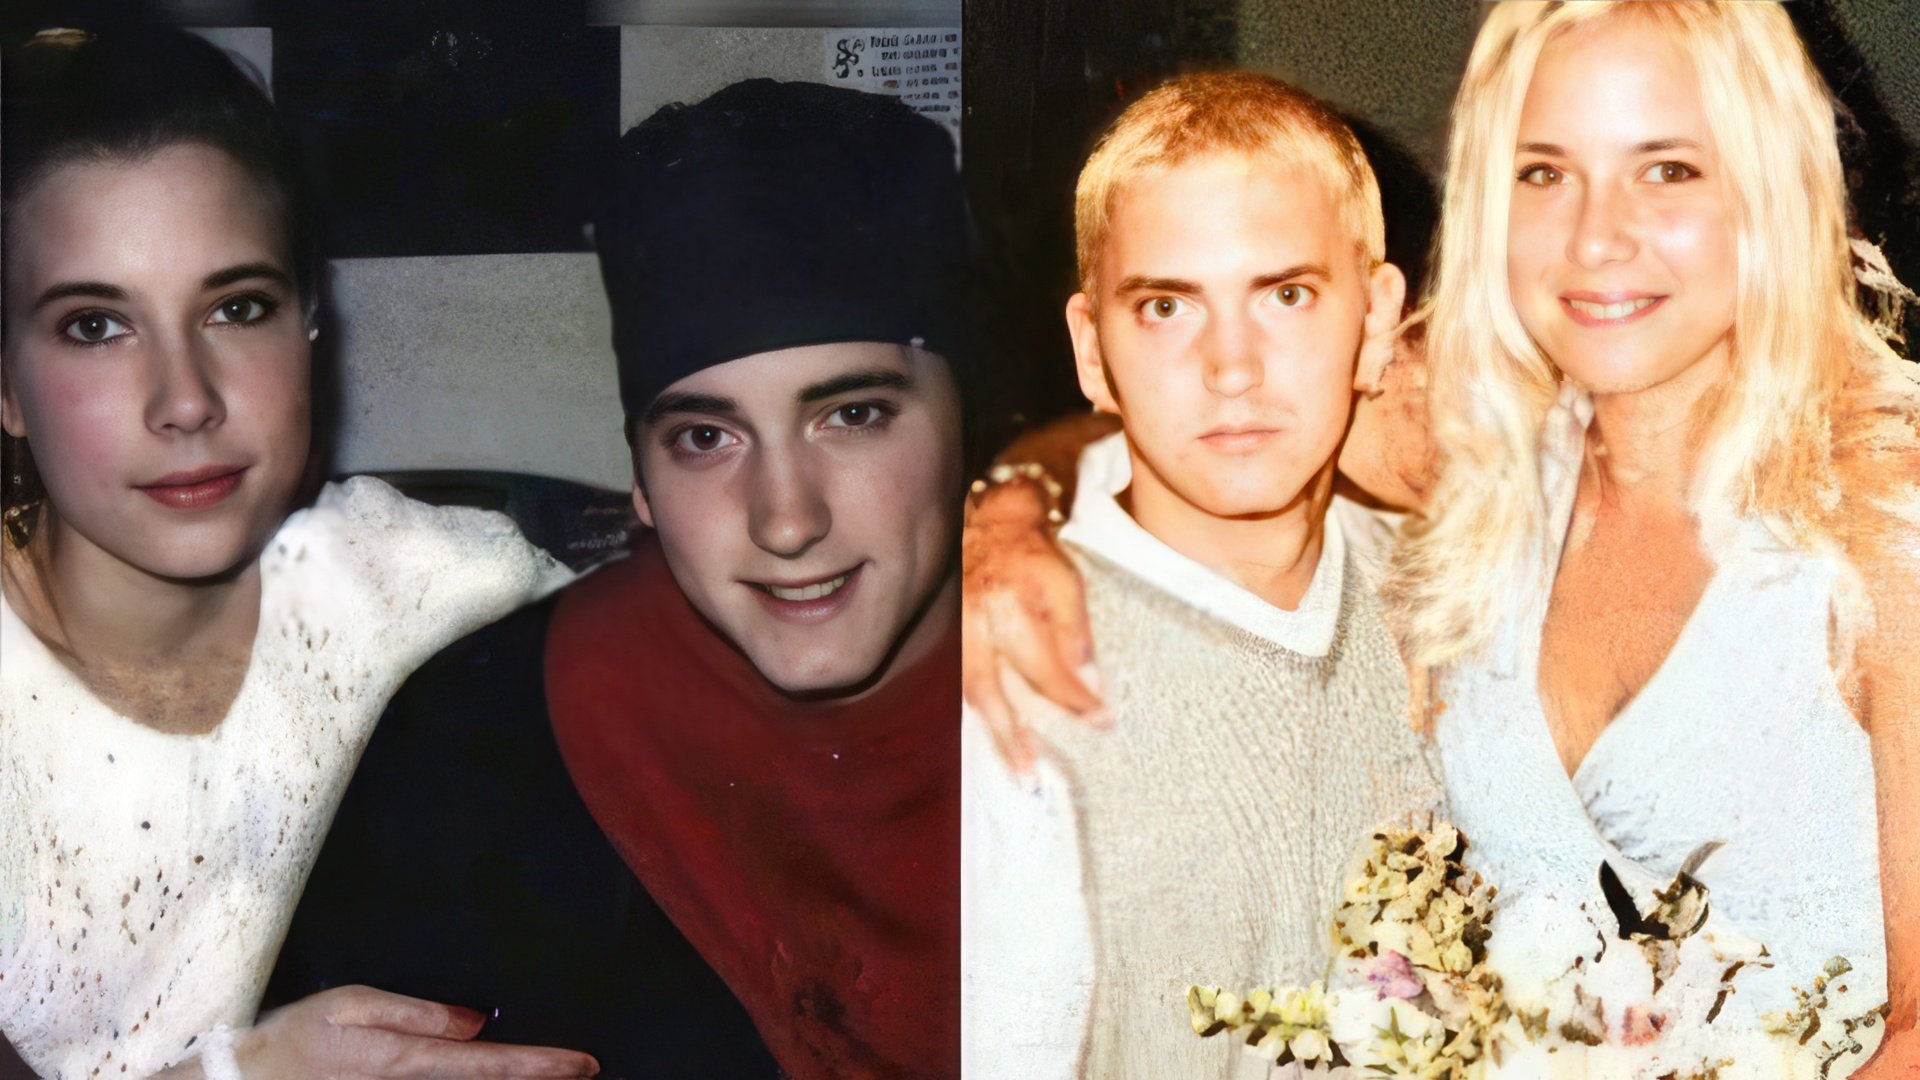 Eminem and his ex-wife Kim